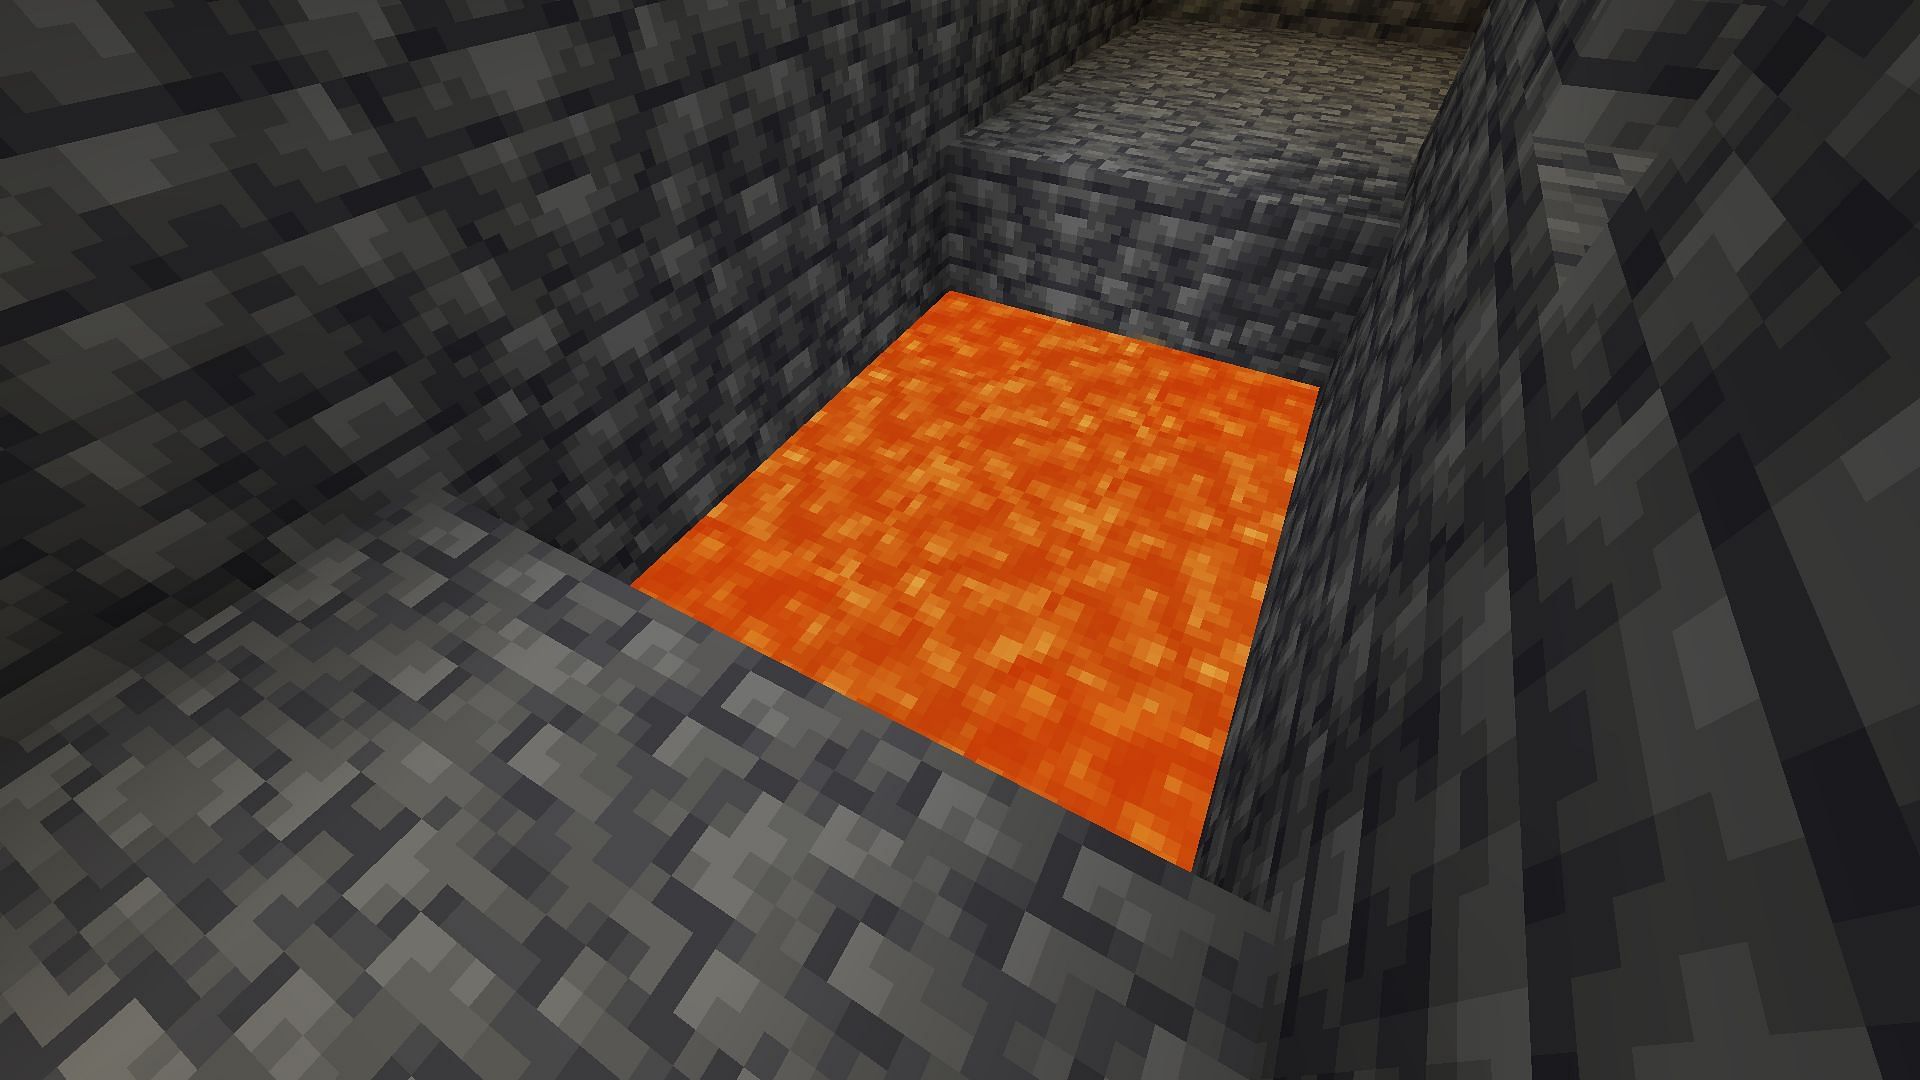 Players can set traps in and around the base to protect it from encroachers in a Minecraft server (Image via Mojang)